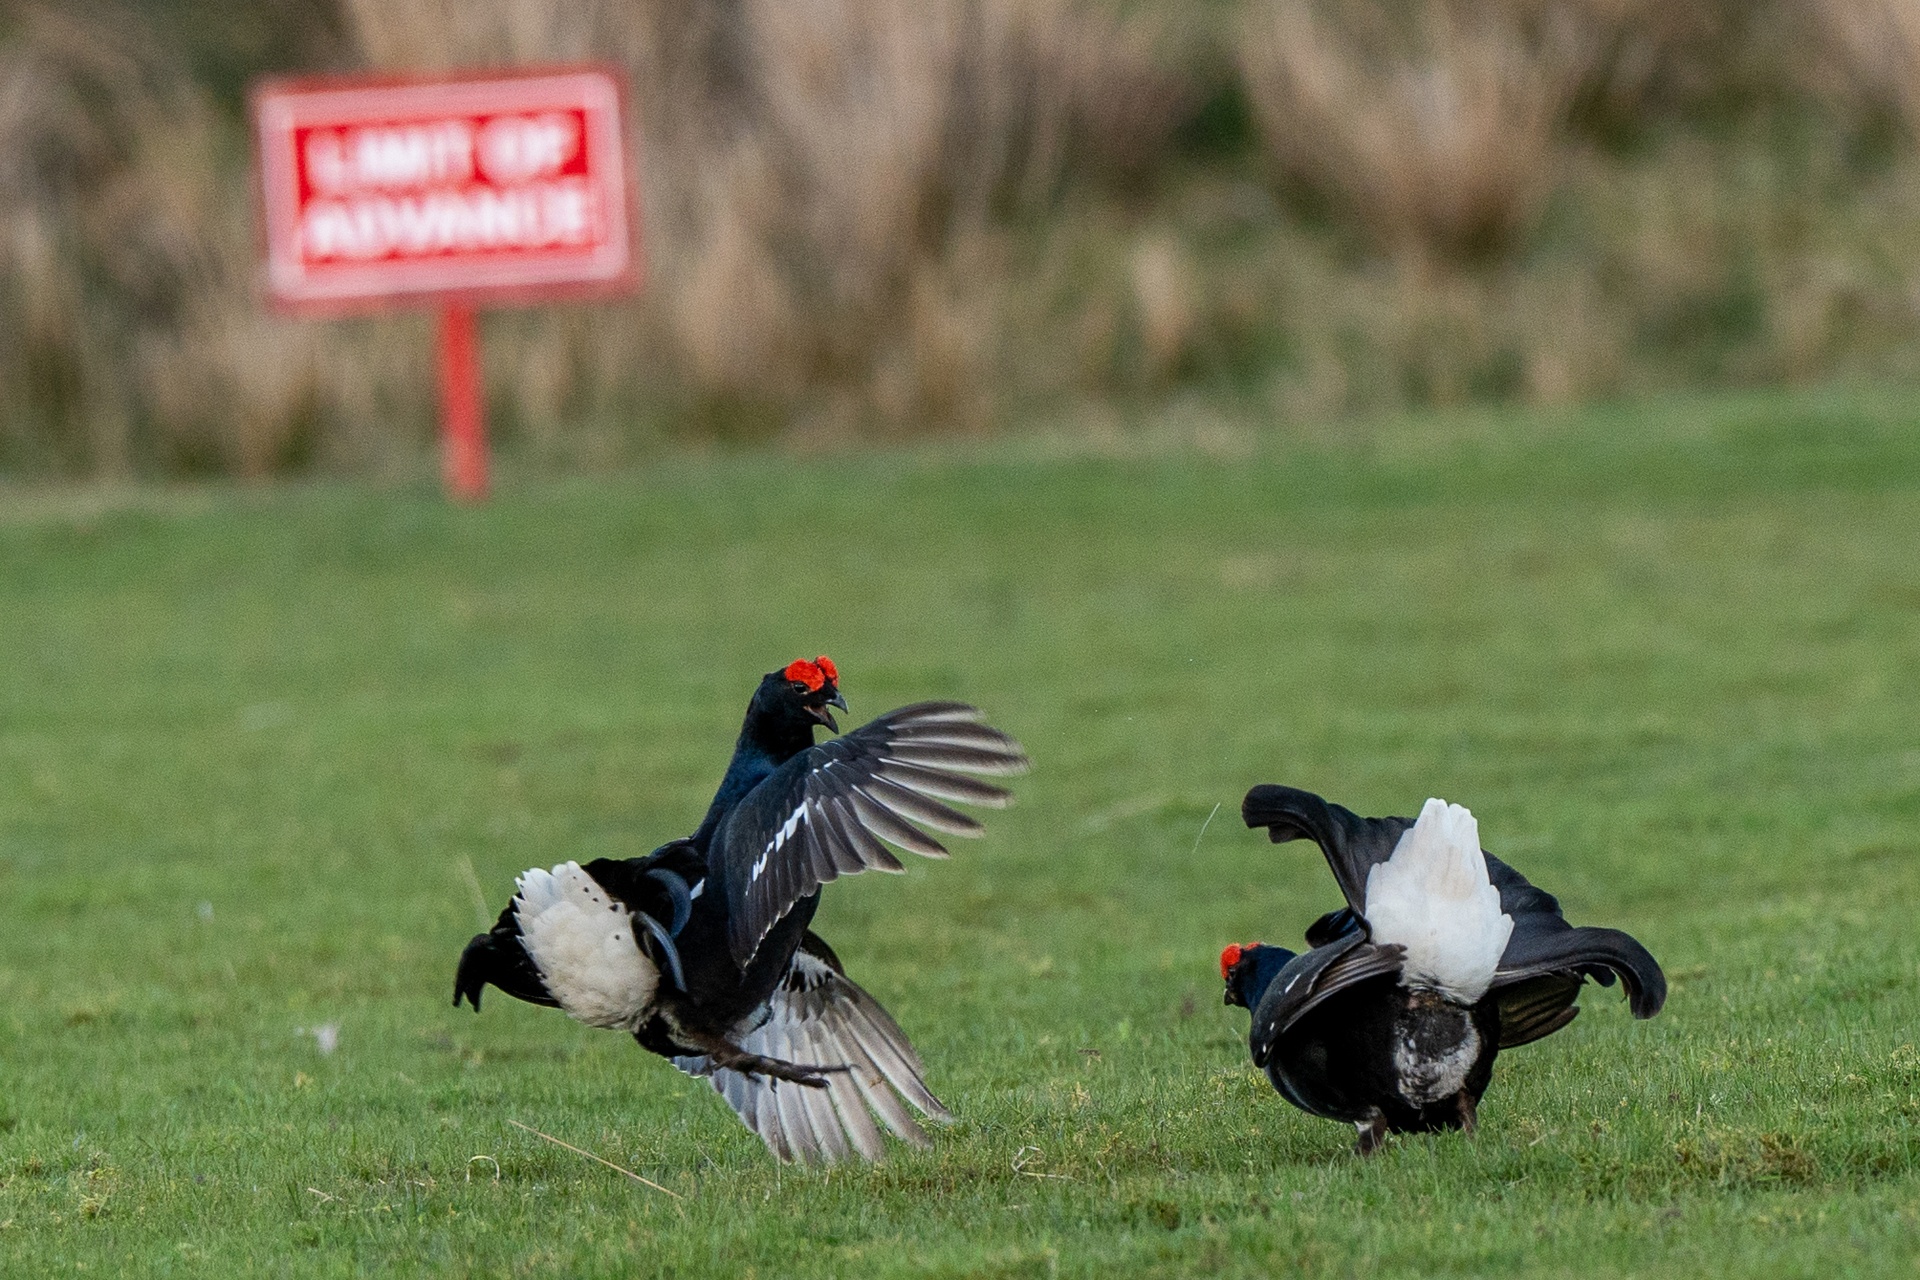 Black grouse mating ritual in Argyll and Bute.